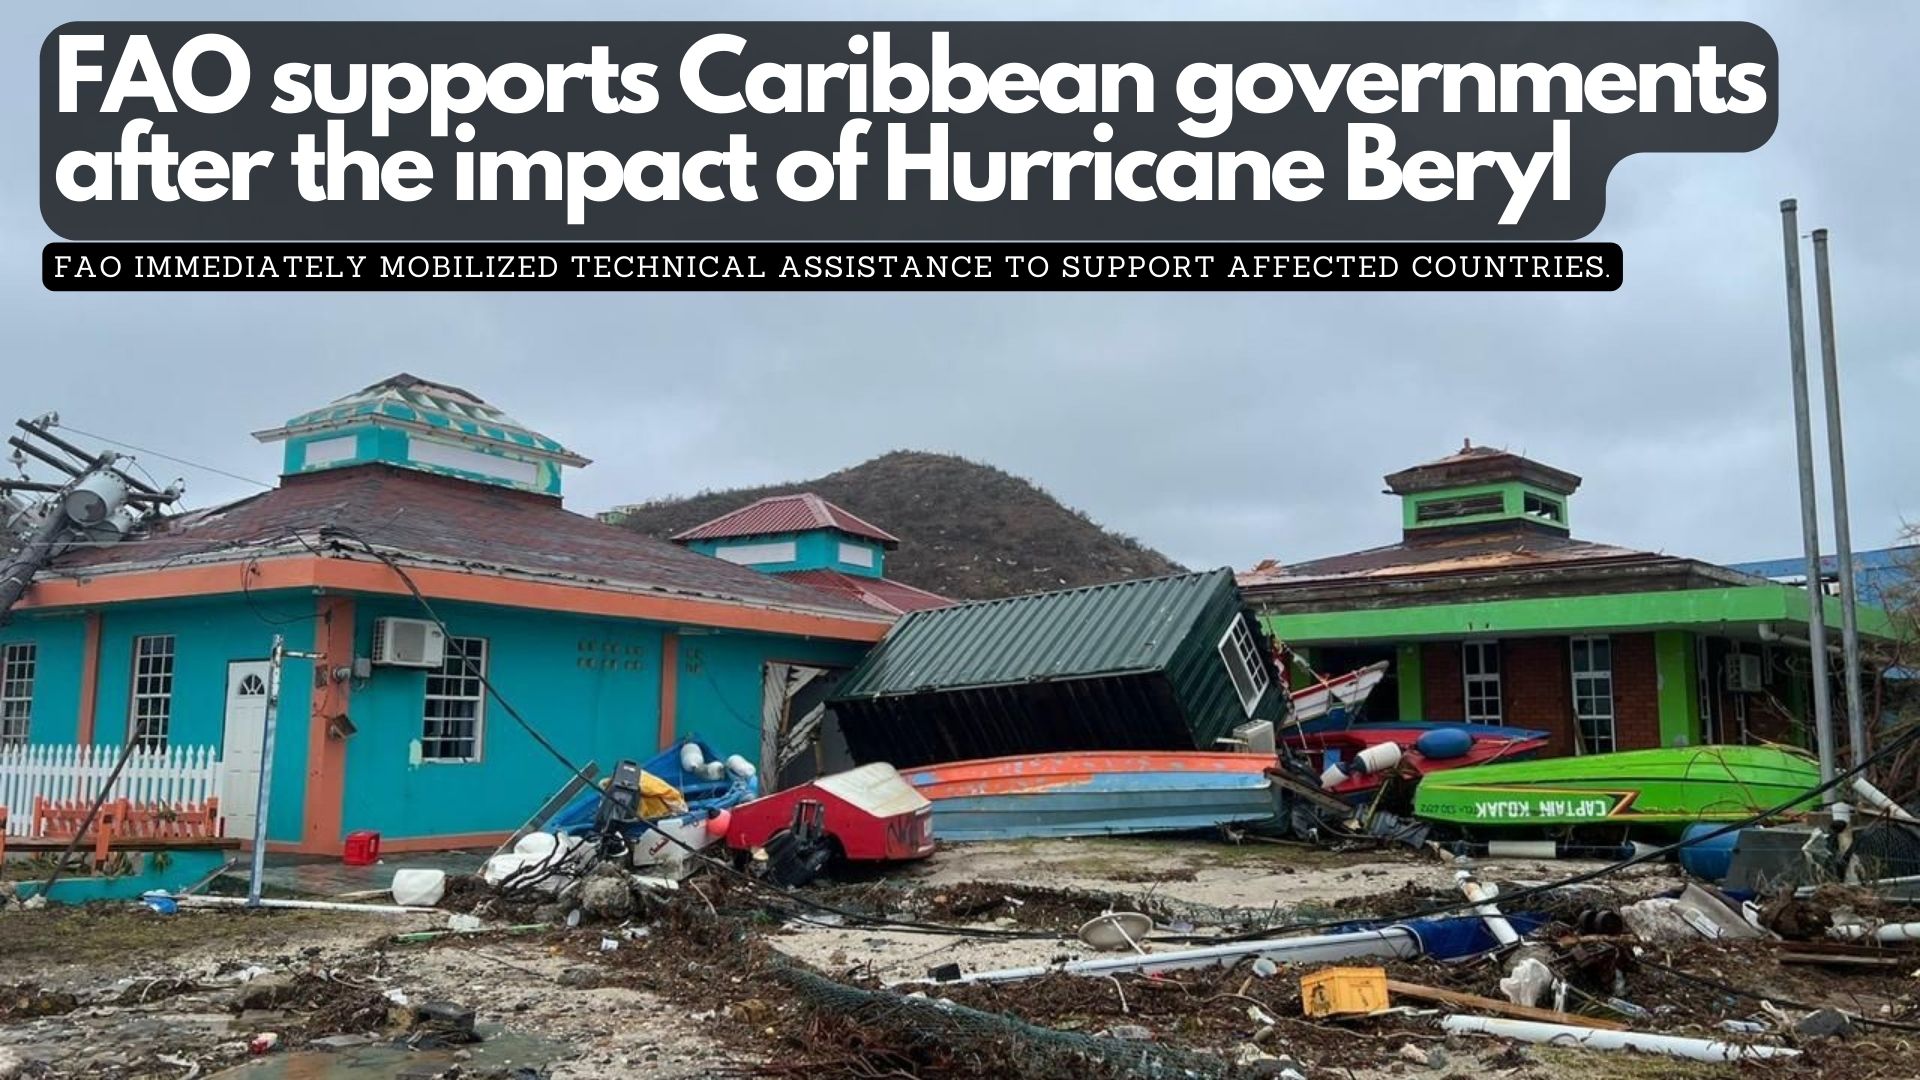 FAO supports Caribbean governments after the impact of Hurricane Beryl